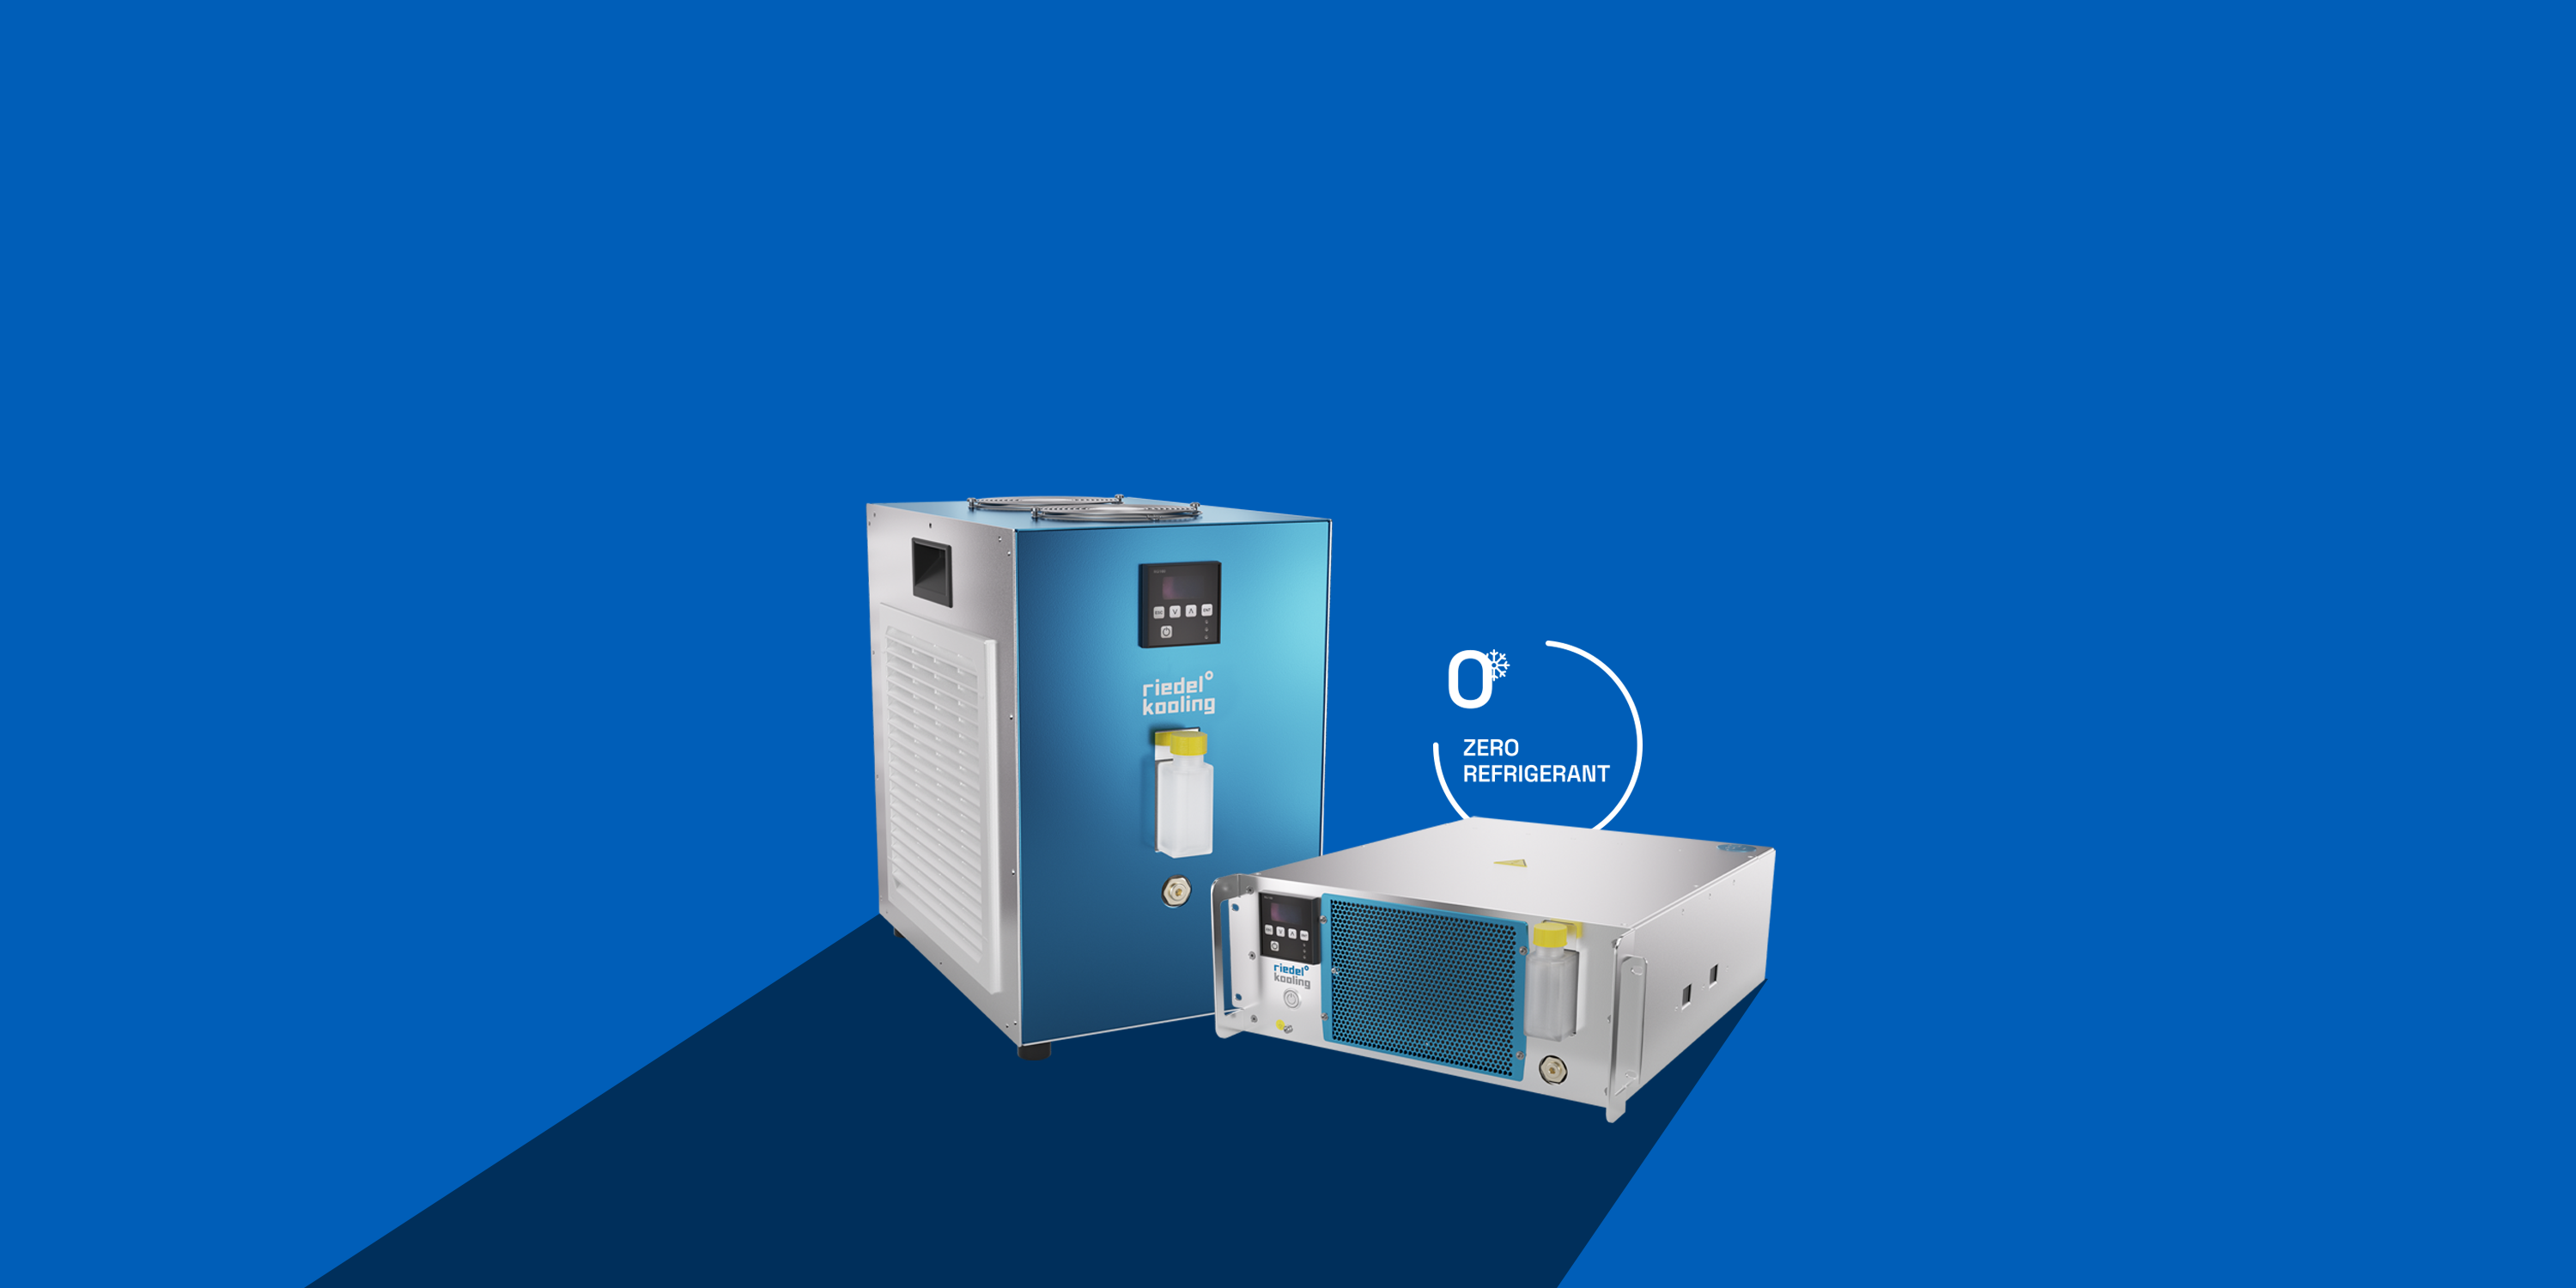 Refrigerant-free cooling solution with cooling capacities up to 680 W for medical and laboratory analysis technology as well as complex laser systems in the low power range, Peltier-Chiller